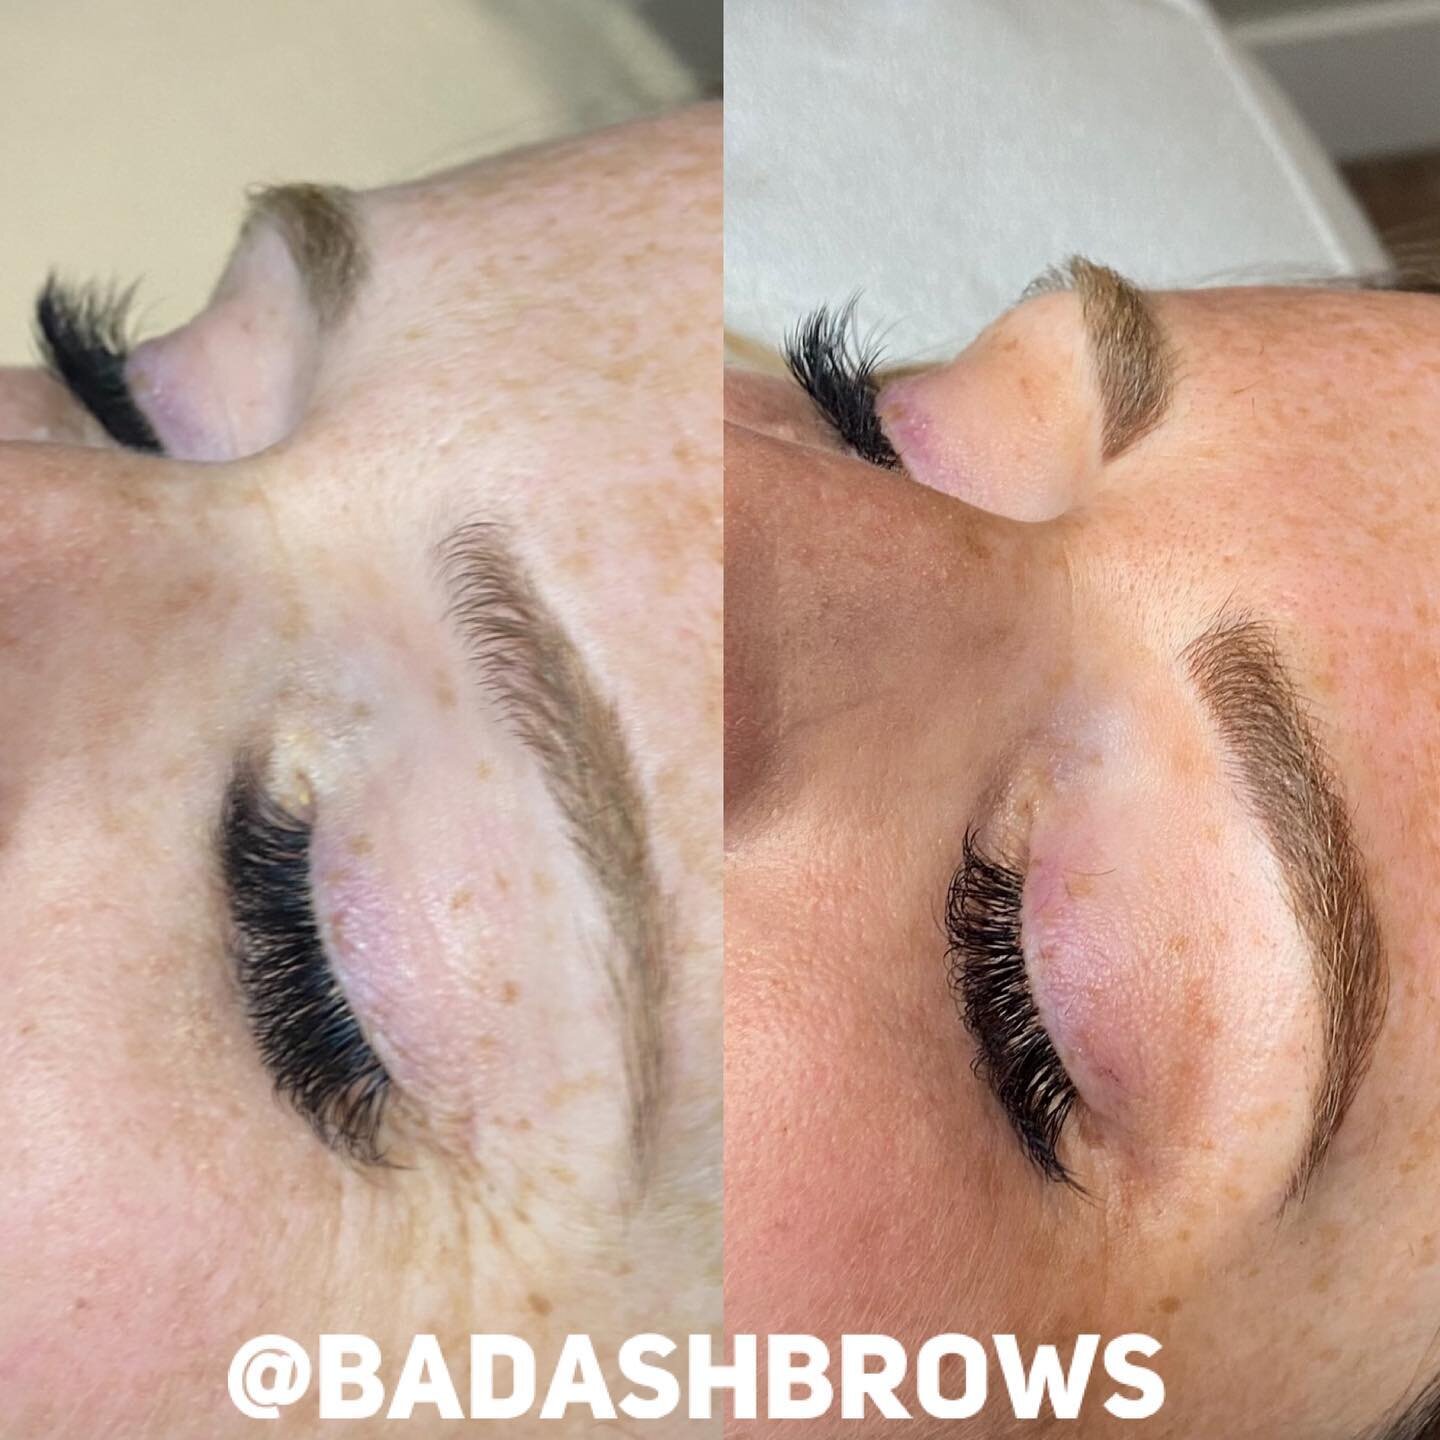 All the love for our hard working mamas out there. Such a great transformation. Keeping with the theme of zero maintenance but bringing an amazing shape to this beautiful woman&rsquo;s brows. 
Thank you as always for the trust ❤️ every opportunity to